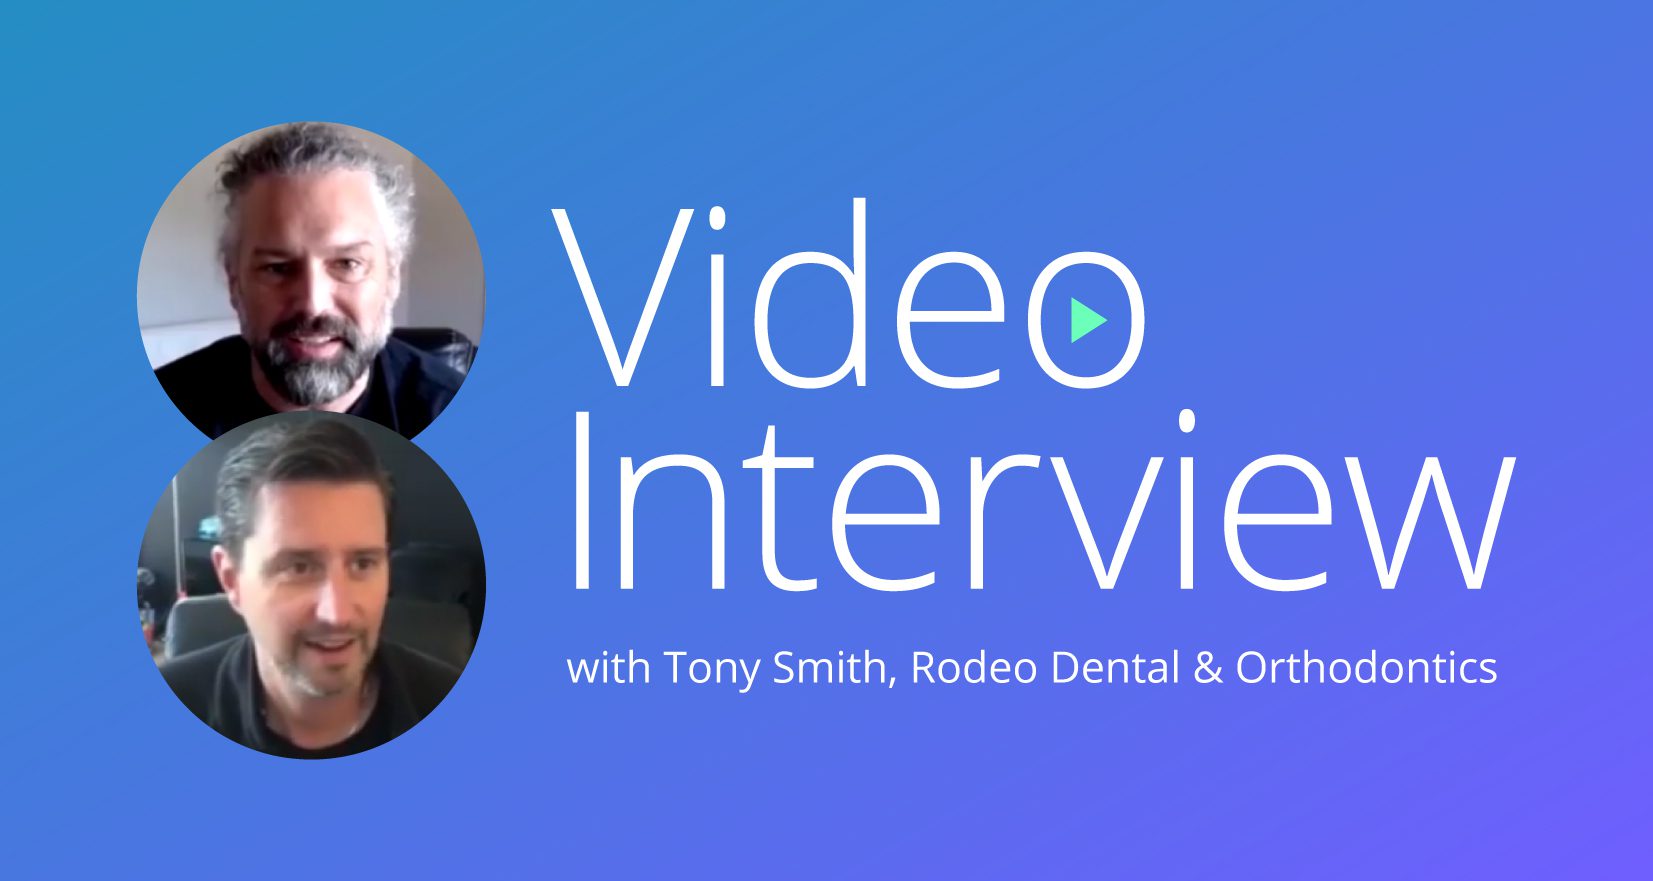 My Social Practice - Social Media Marketing for Dental & Dental Specialty Practices - dental marketing interview